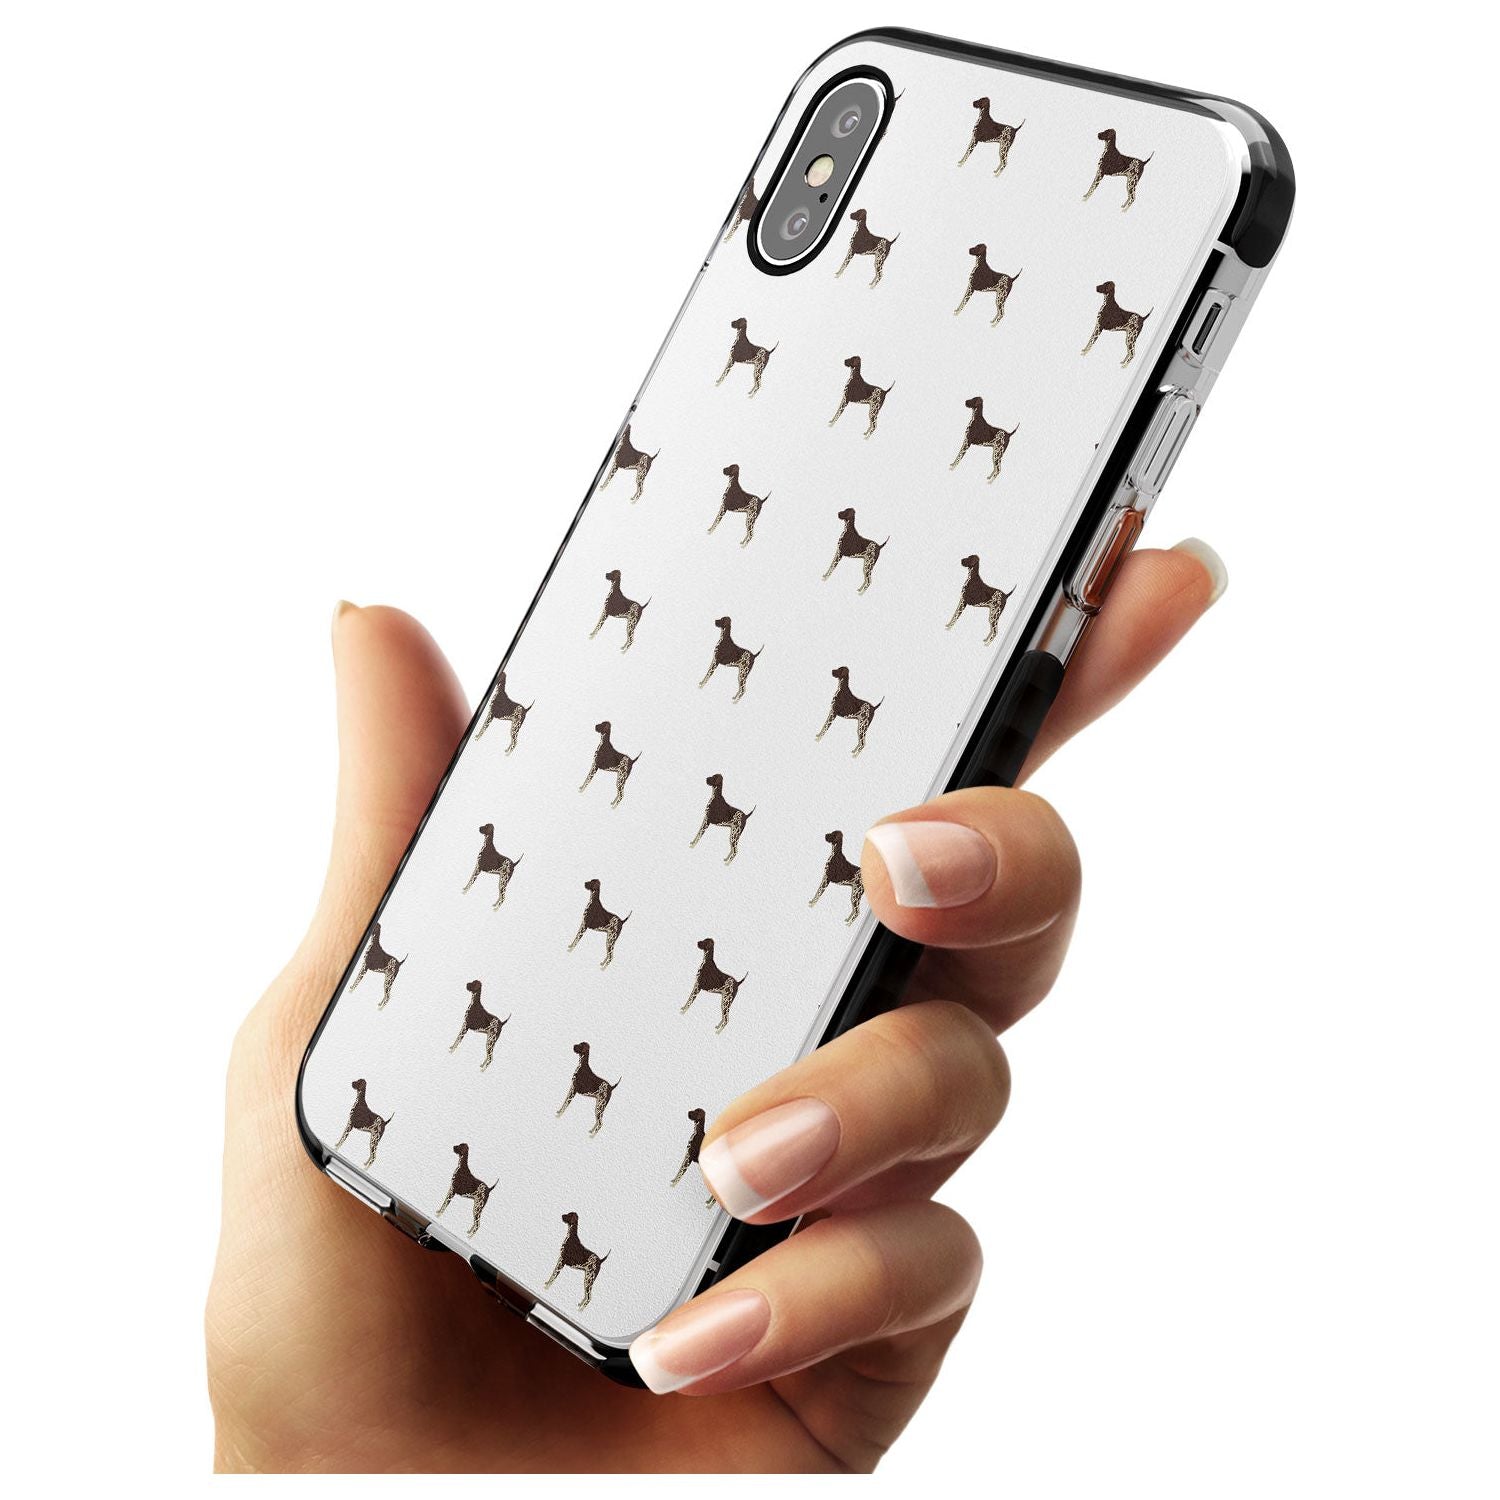 German Shorthaired Pointer Dog Pattern Black Impact Phone Case for iPhone X XS Max XR